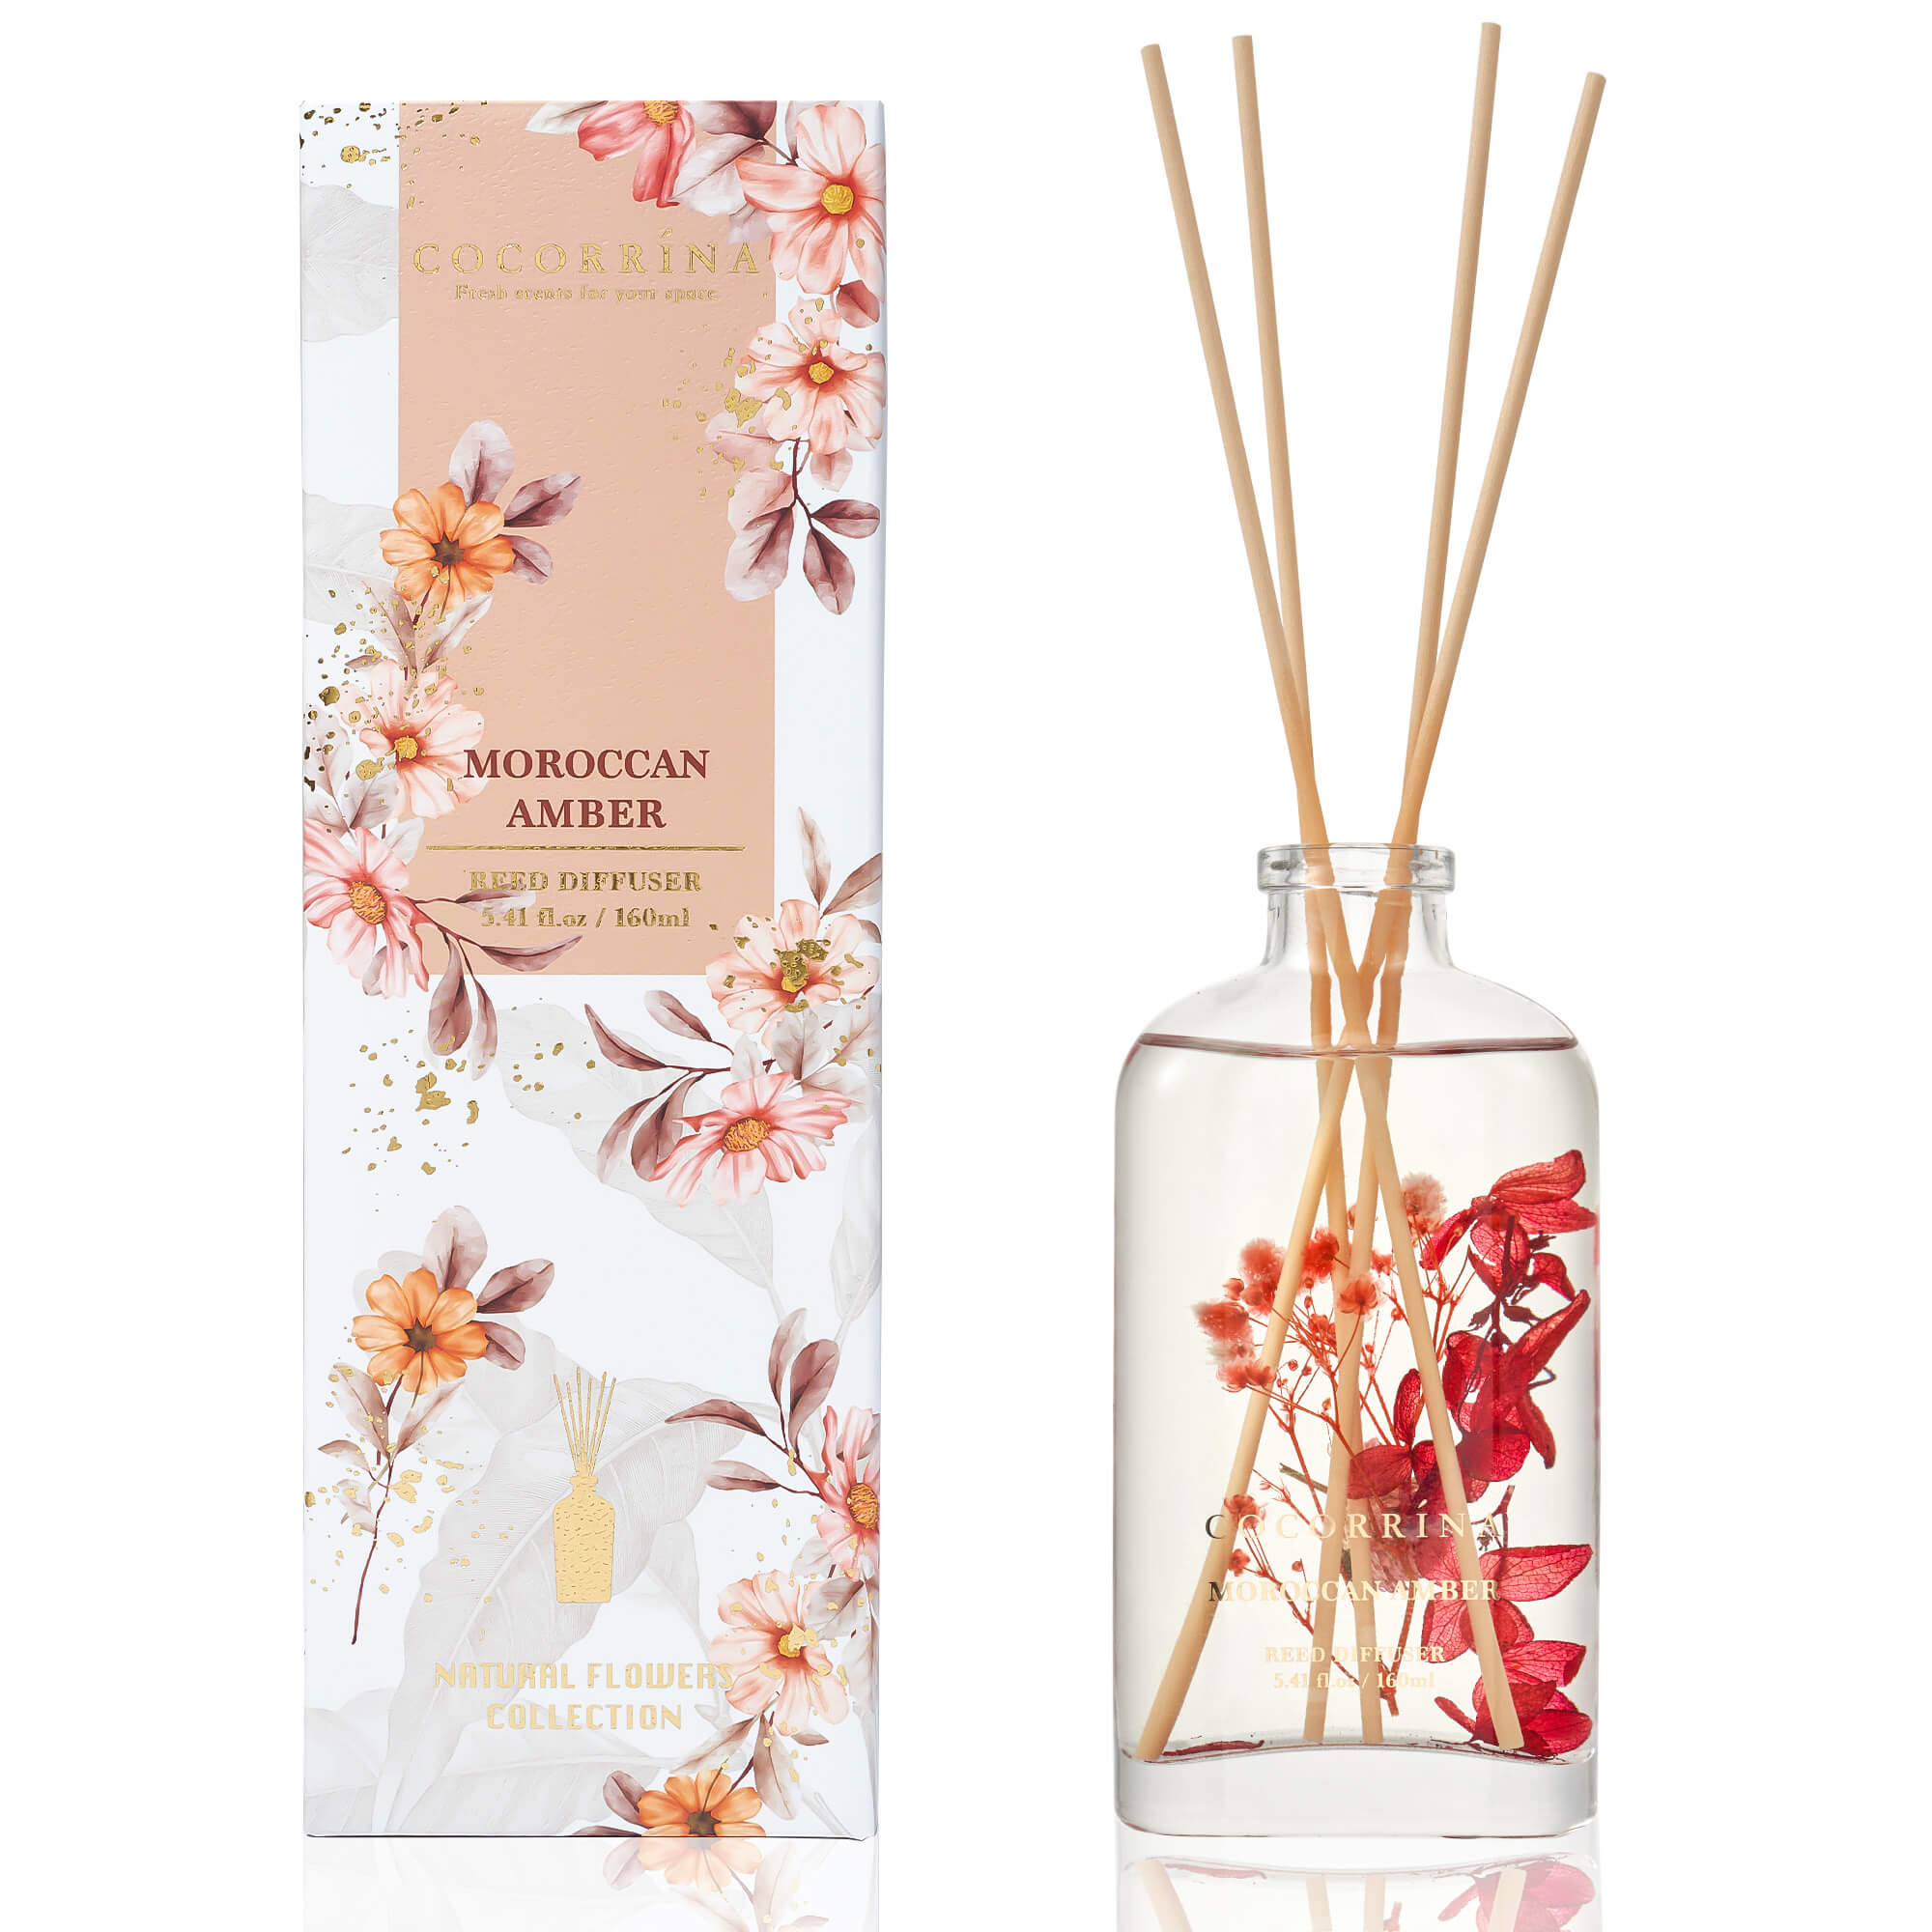 COCORRÍNA Moroccan Amber Scented Blooms Series Reed Diffuser Set